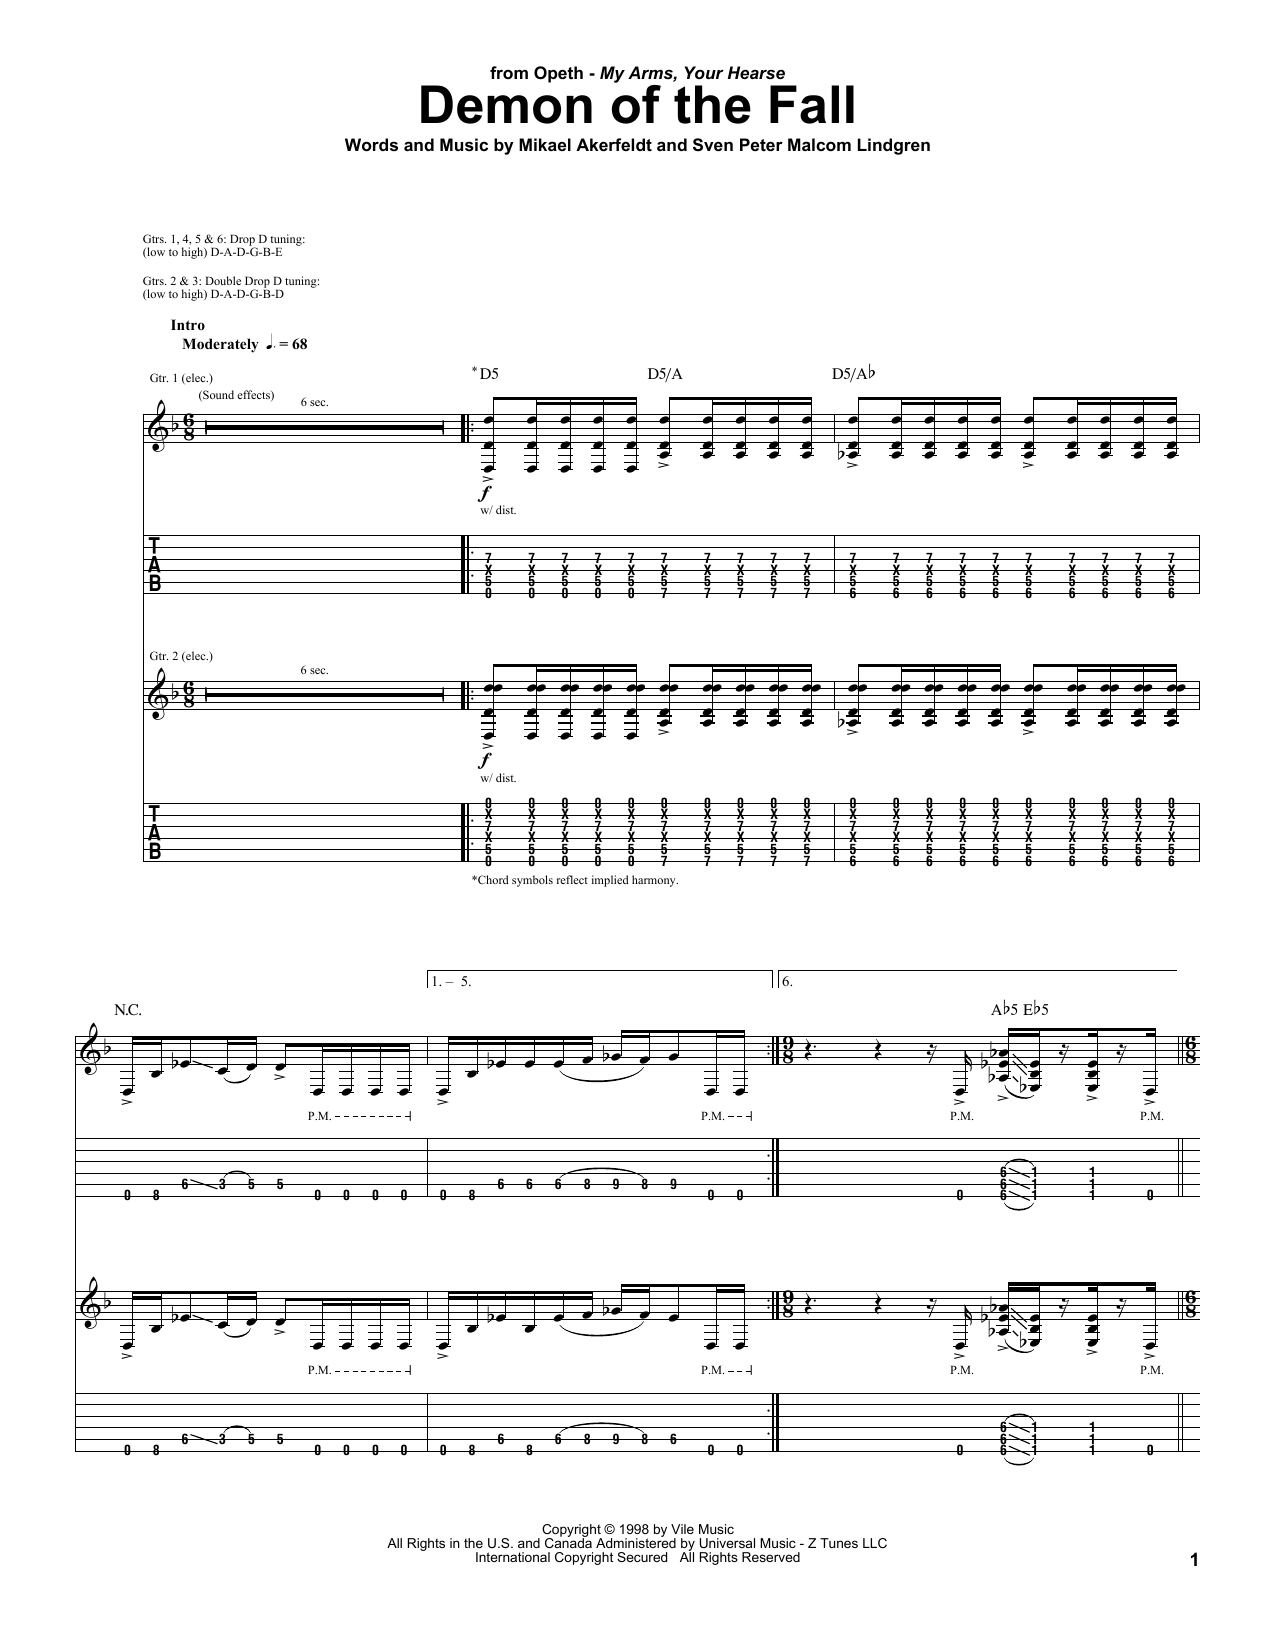 Download Opeth Demon Of The Fall Sheet Music